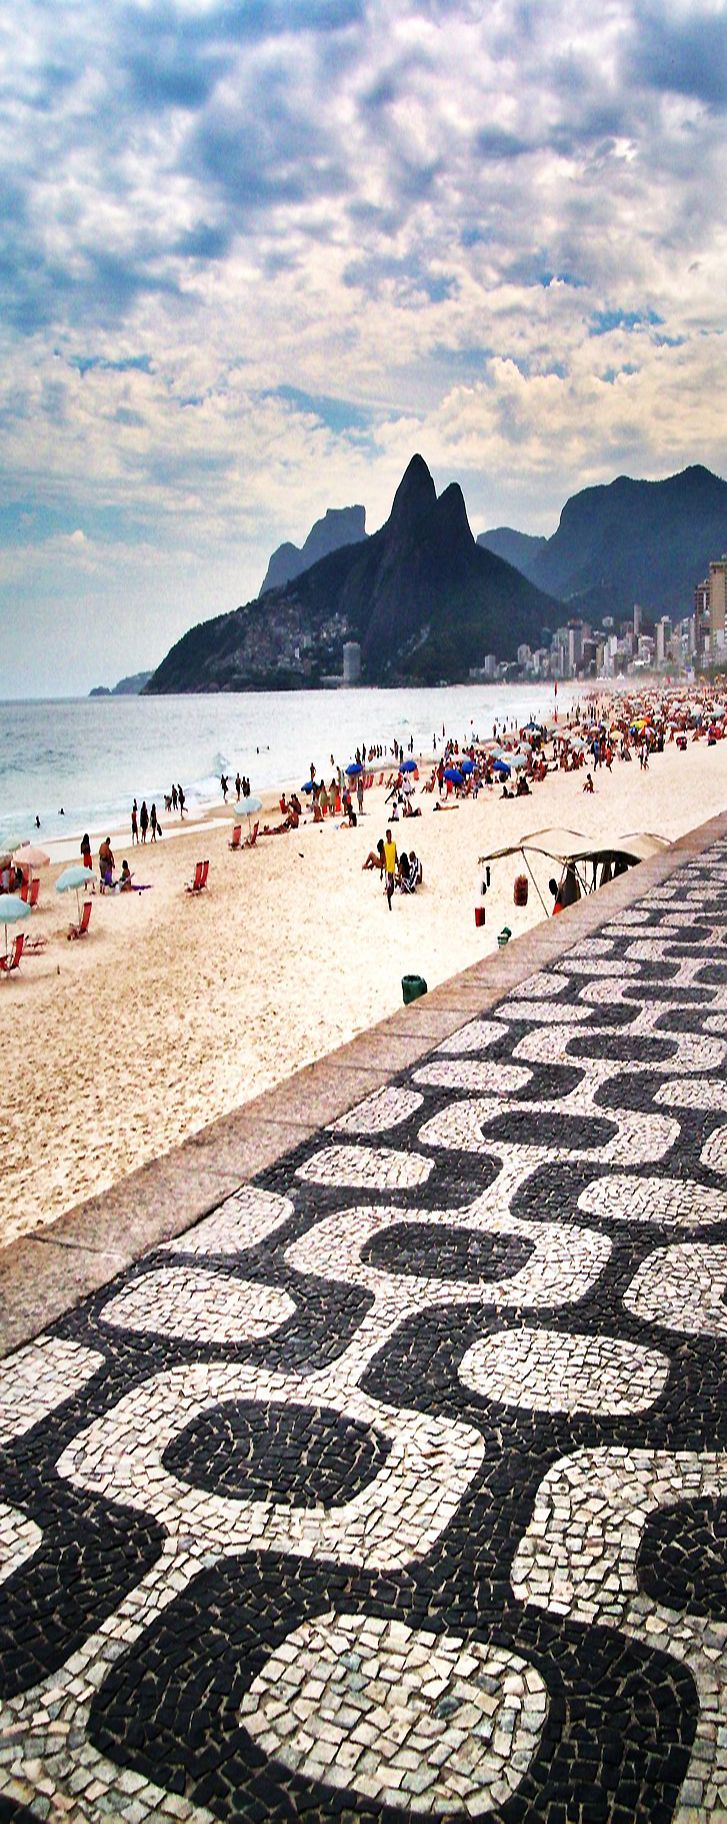 Ipanema Beach,Brazil | cynthia record  I have been here before and it is the closest thing to paradise you can possibly be